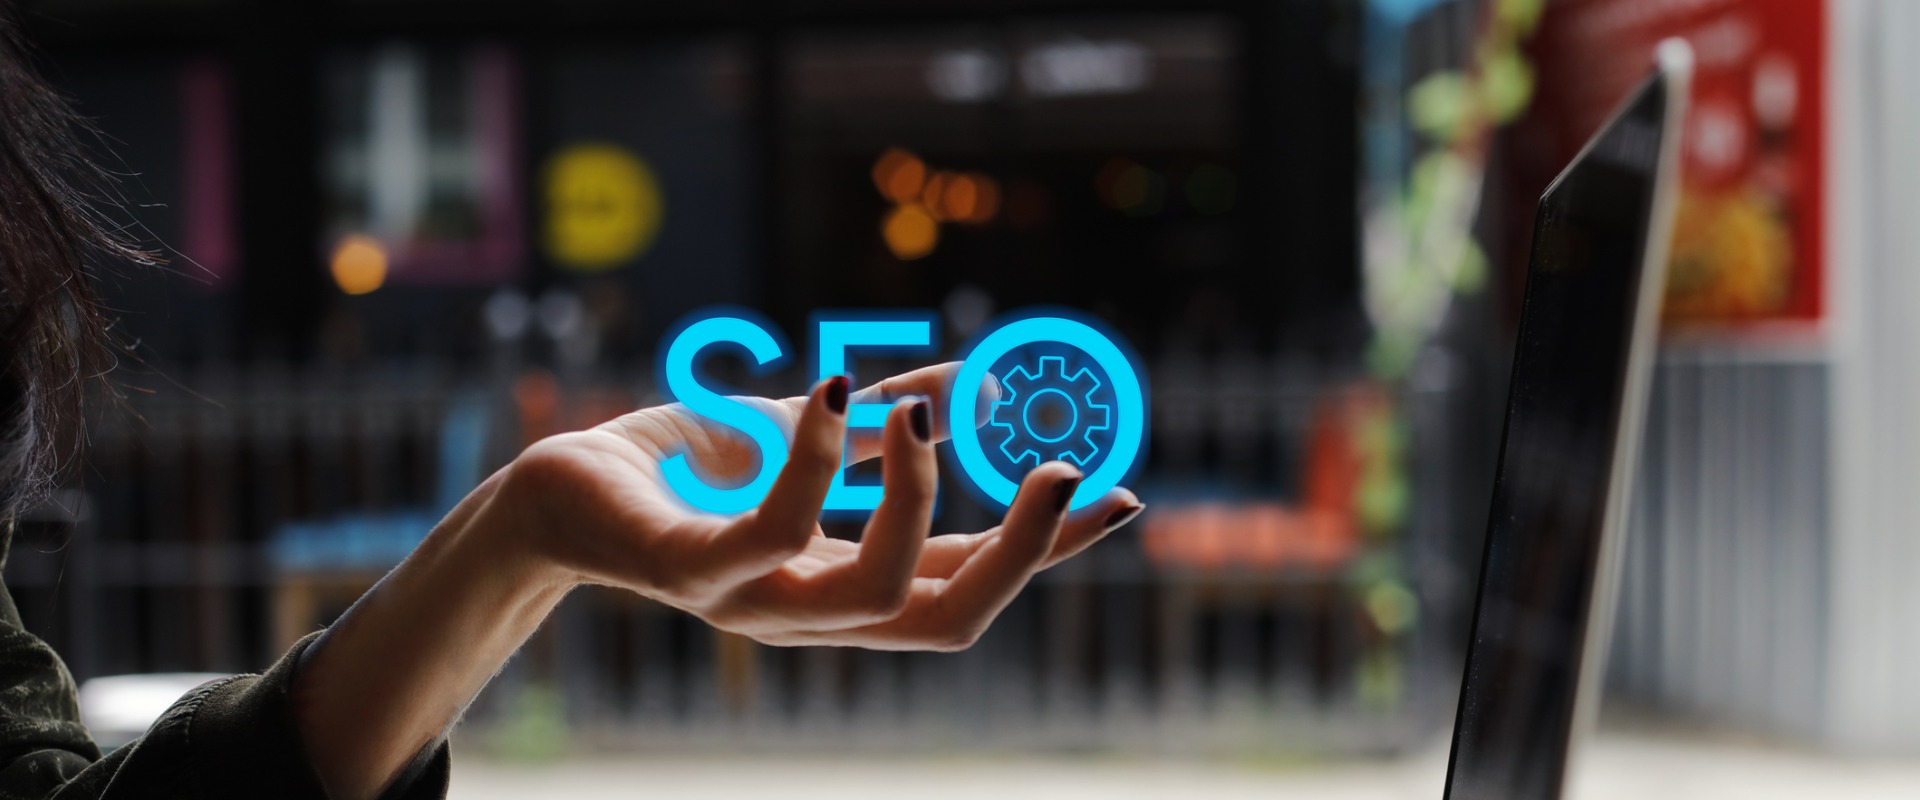 Whats included in seo services?